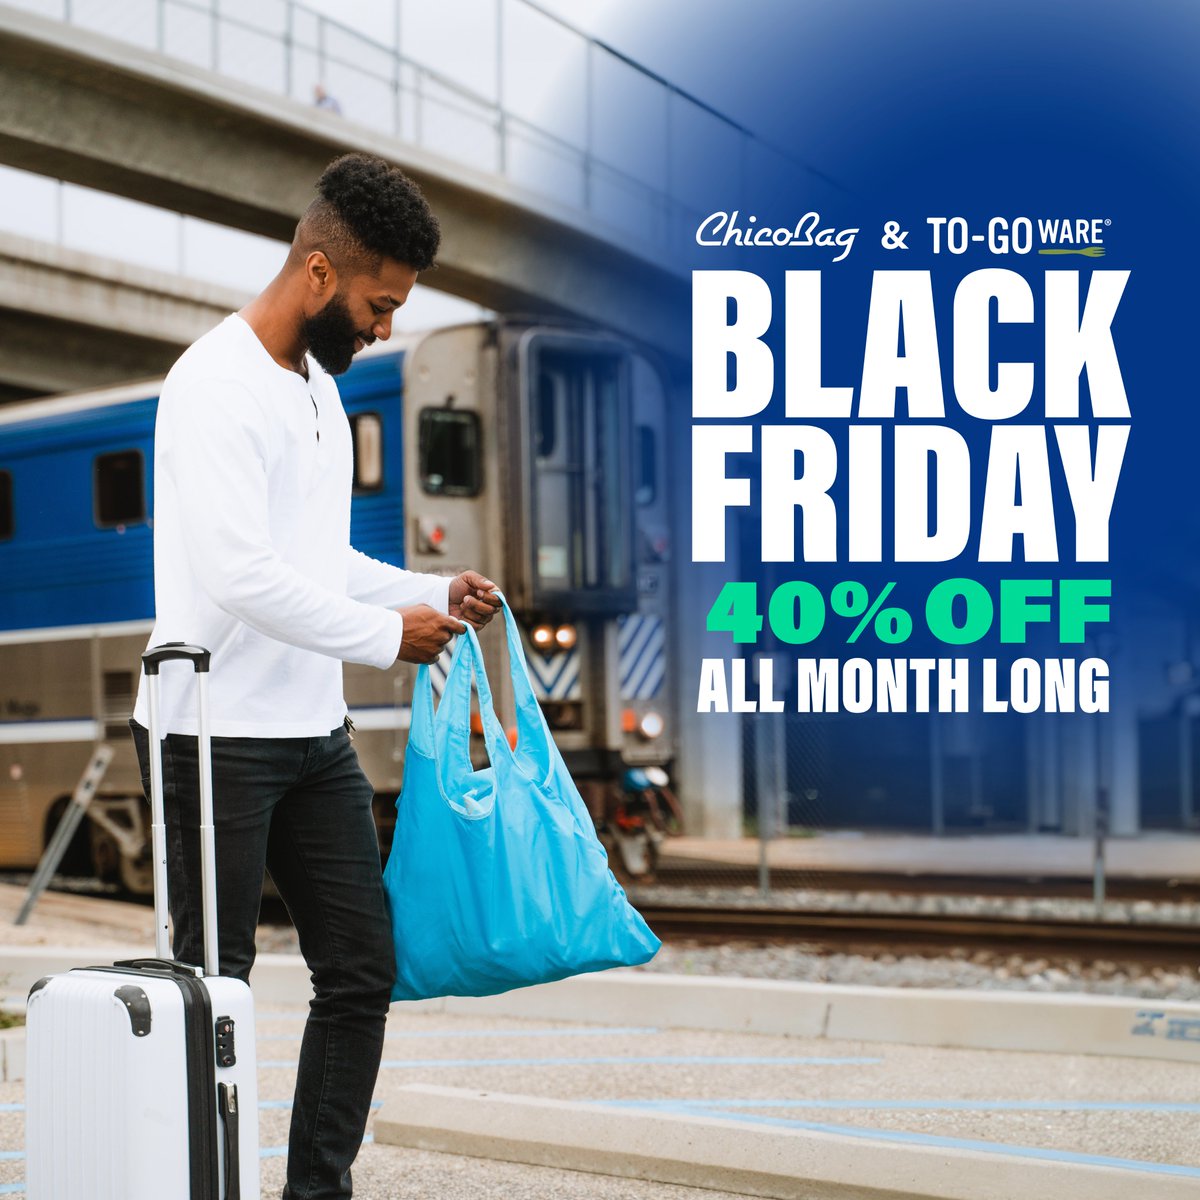 Fan favorite Vita Bag (and 8 other friends) + Forty Percent Off = The Black Friday ChicoBag & To-Go Ware Sale! Shop it here: tinyurl.com/yc8hyumn #ChicoBag #BlackFriday2023